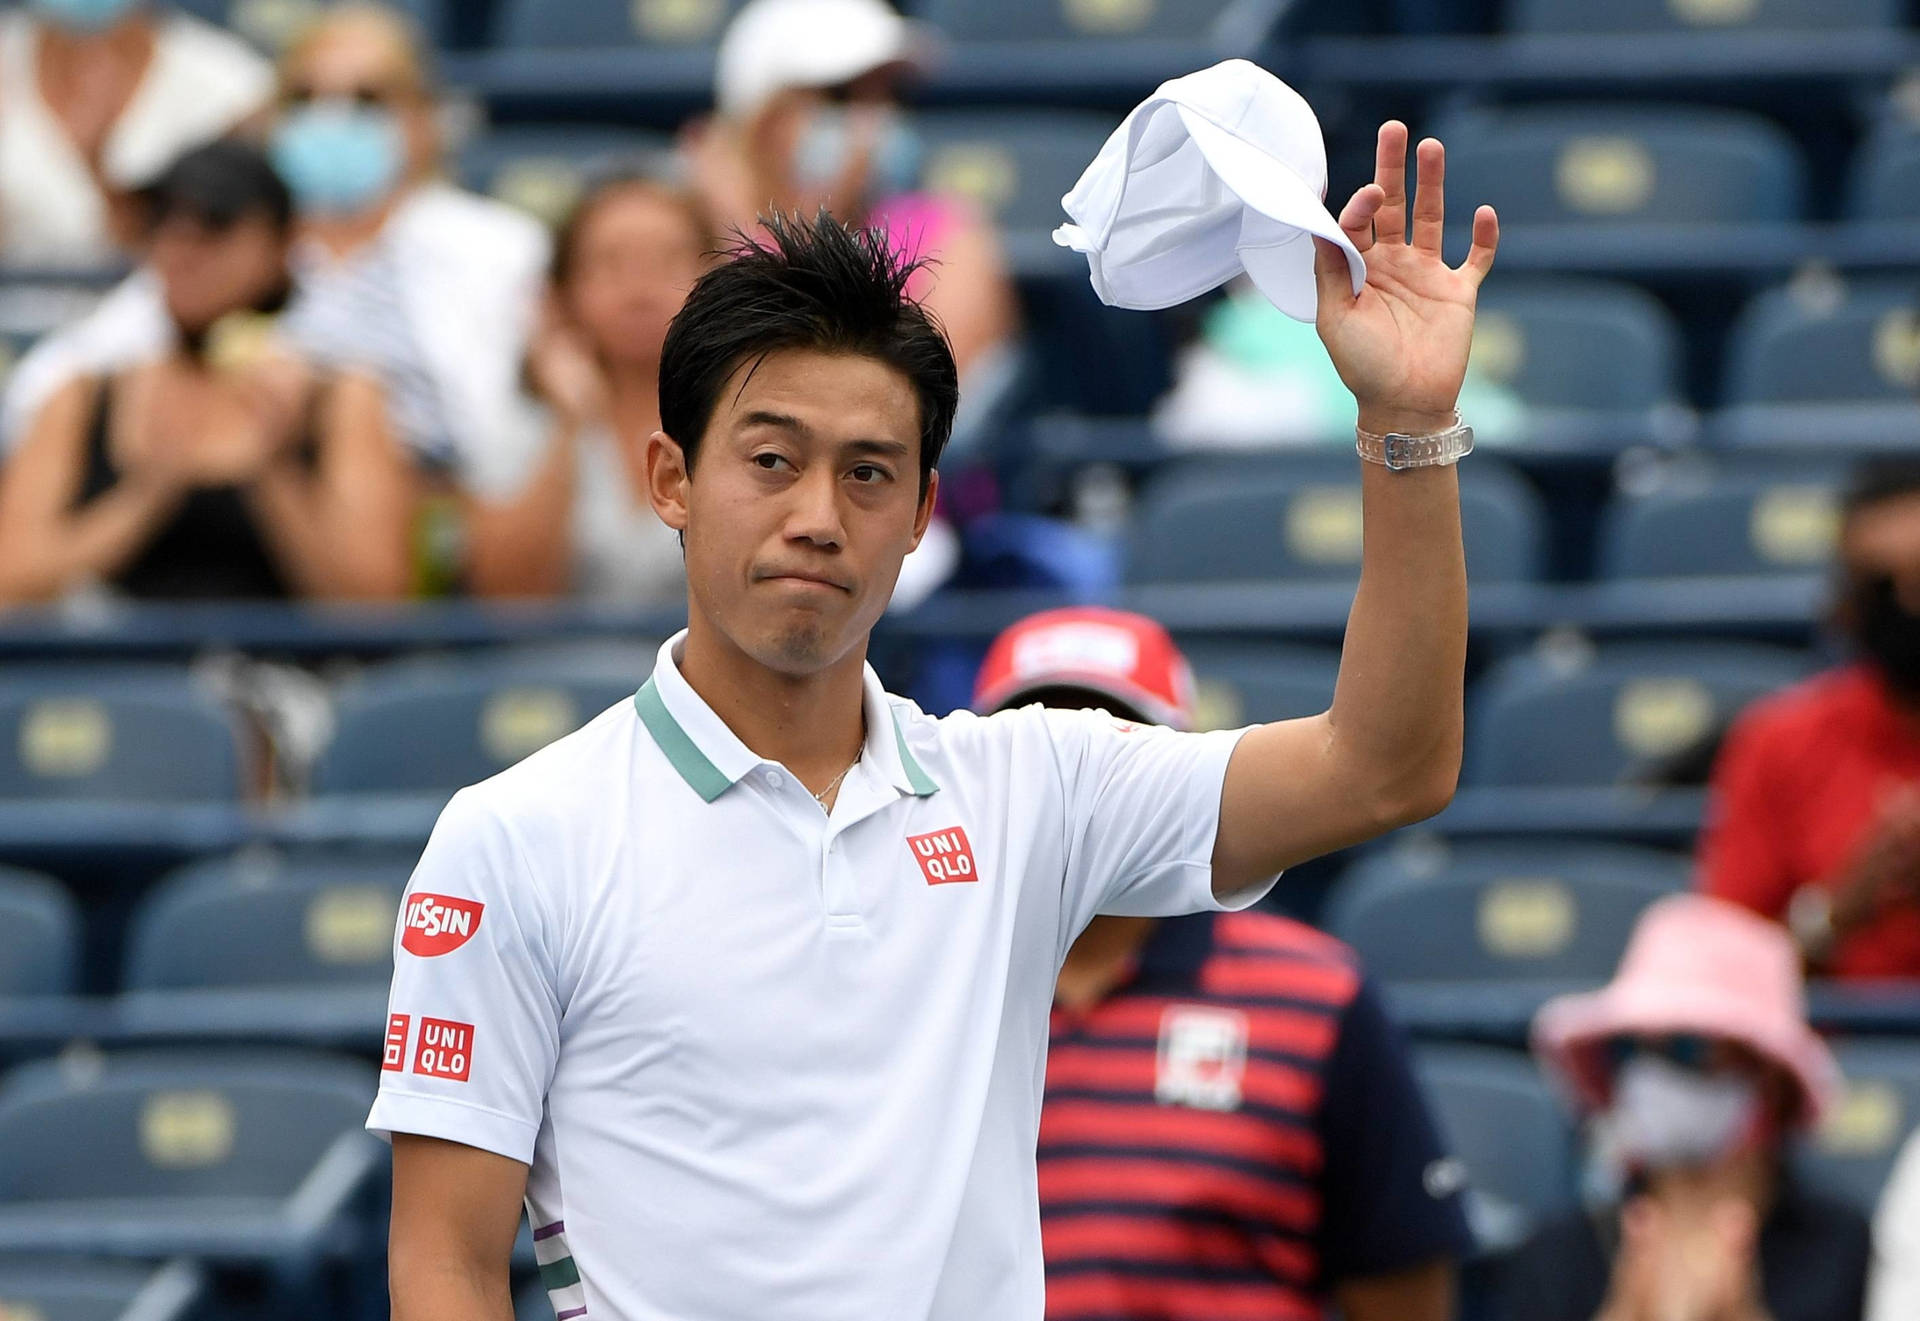 a tennis player is waving his hat to the crowd Wallpaper